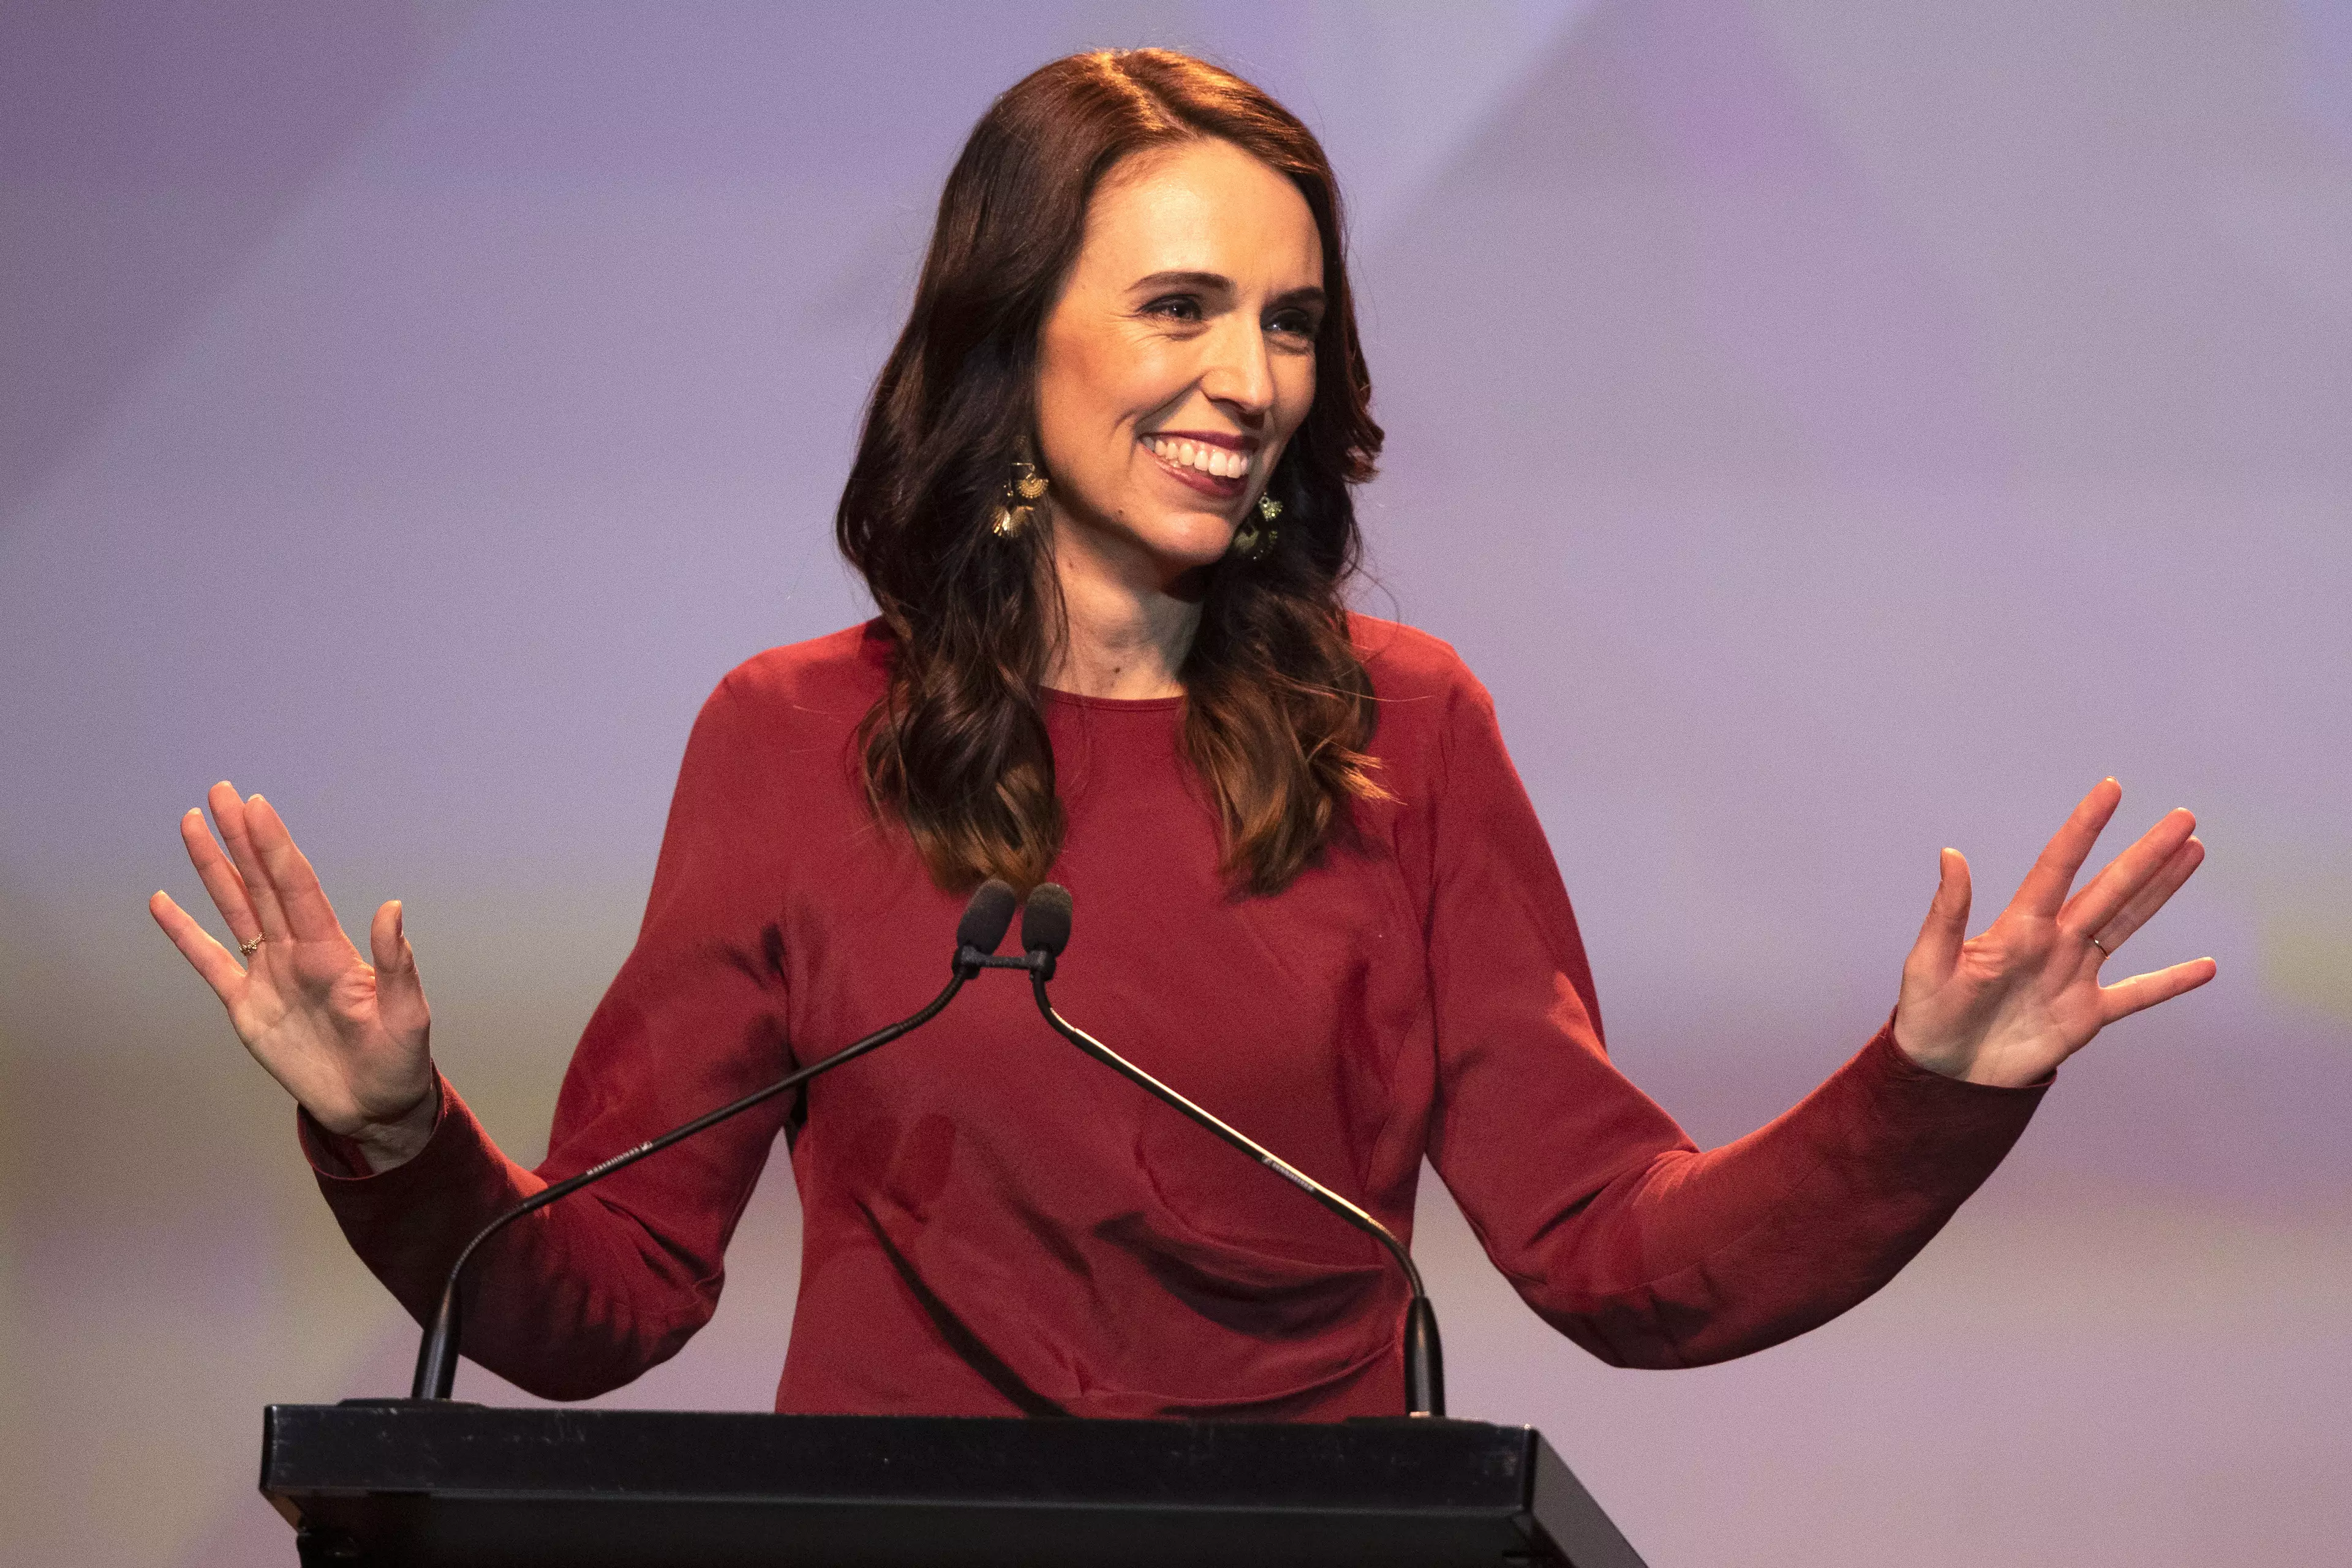 The New Zealand Prime Minister says her appointments were made on merit (